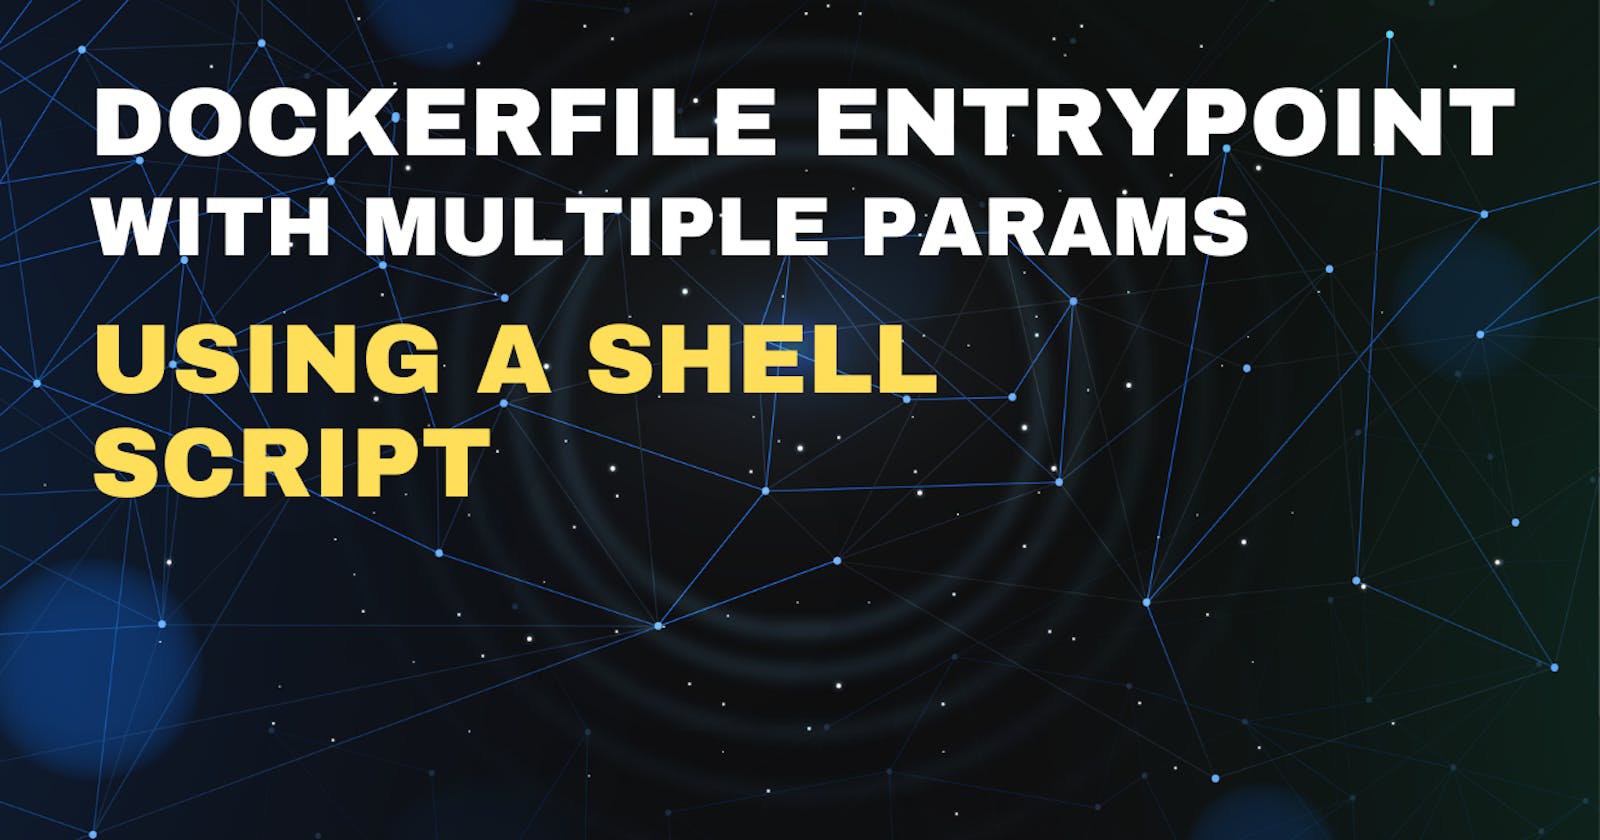 Dockerfile Entrypoint with multiple params using a shell script